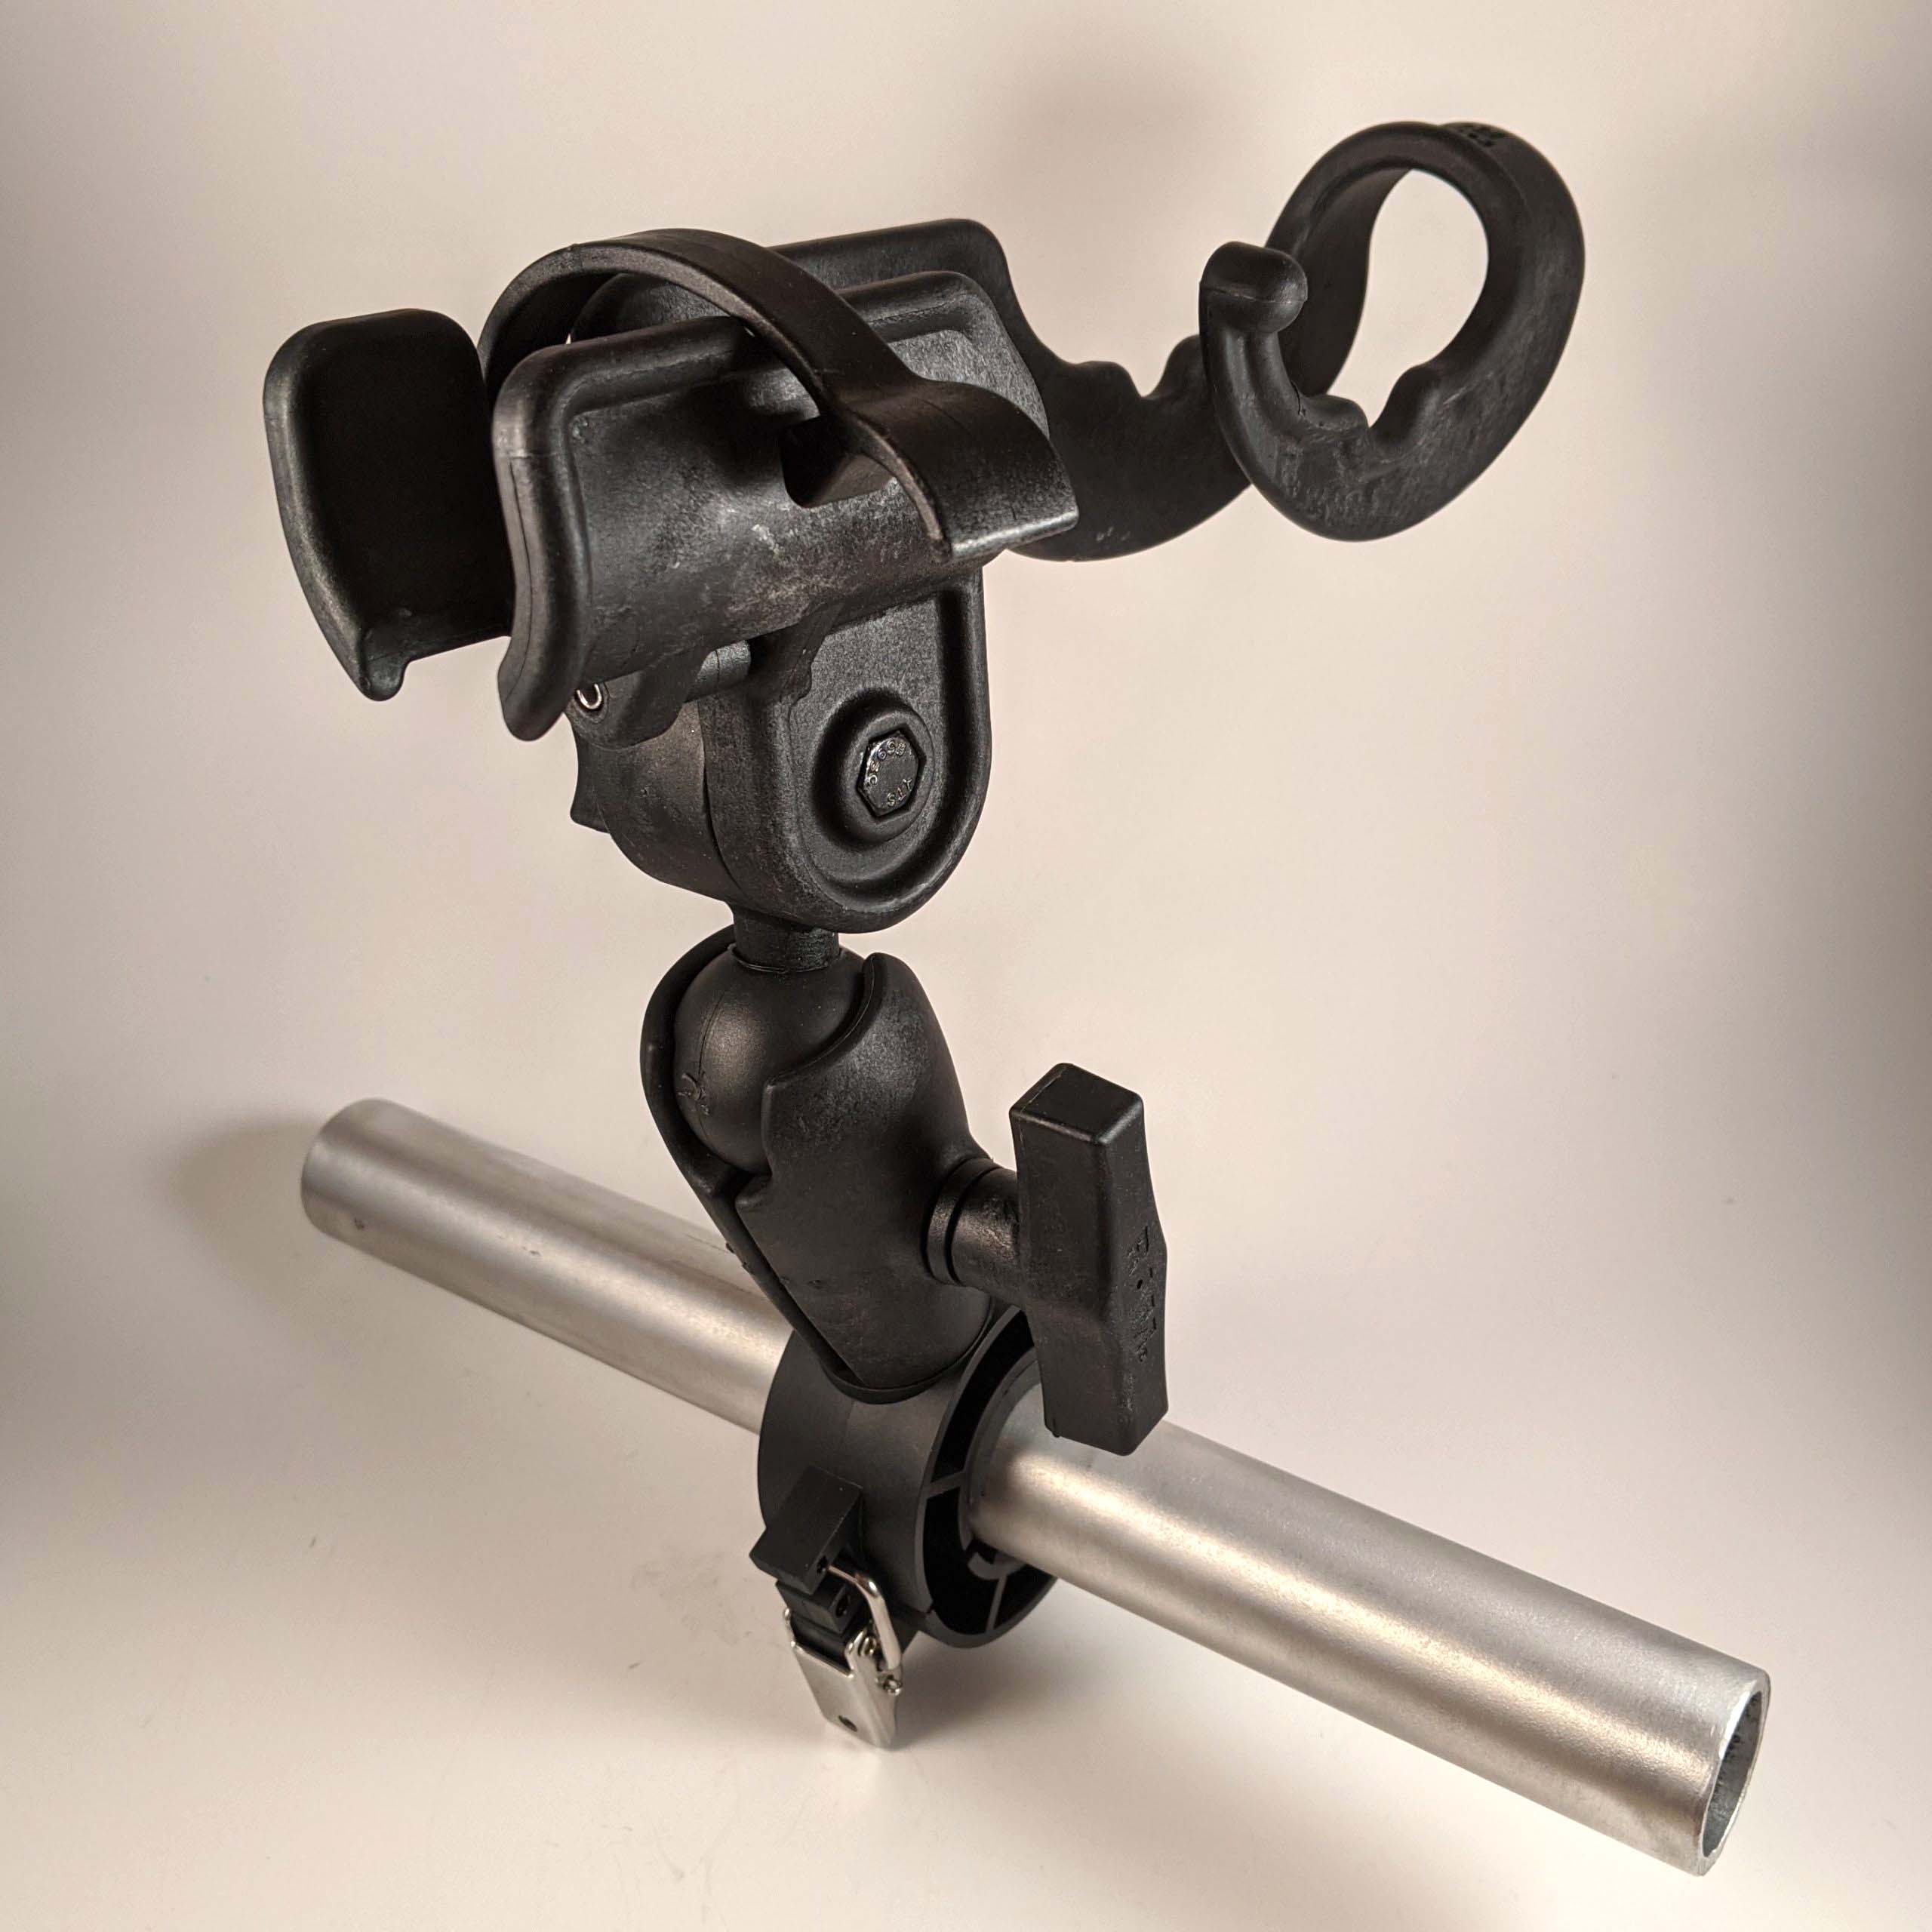 Action Camera Mounts for Marine